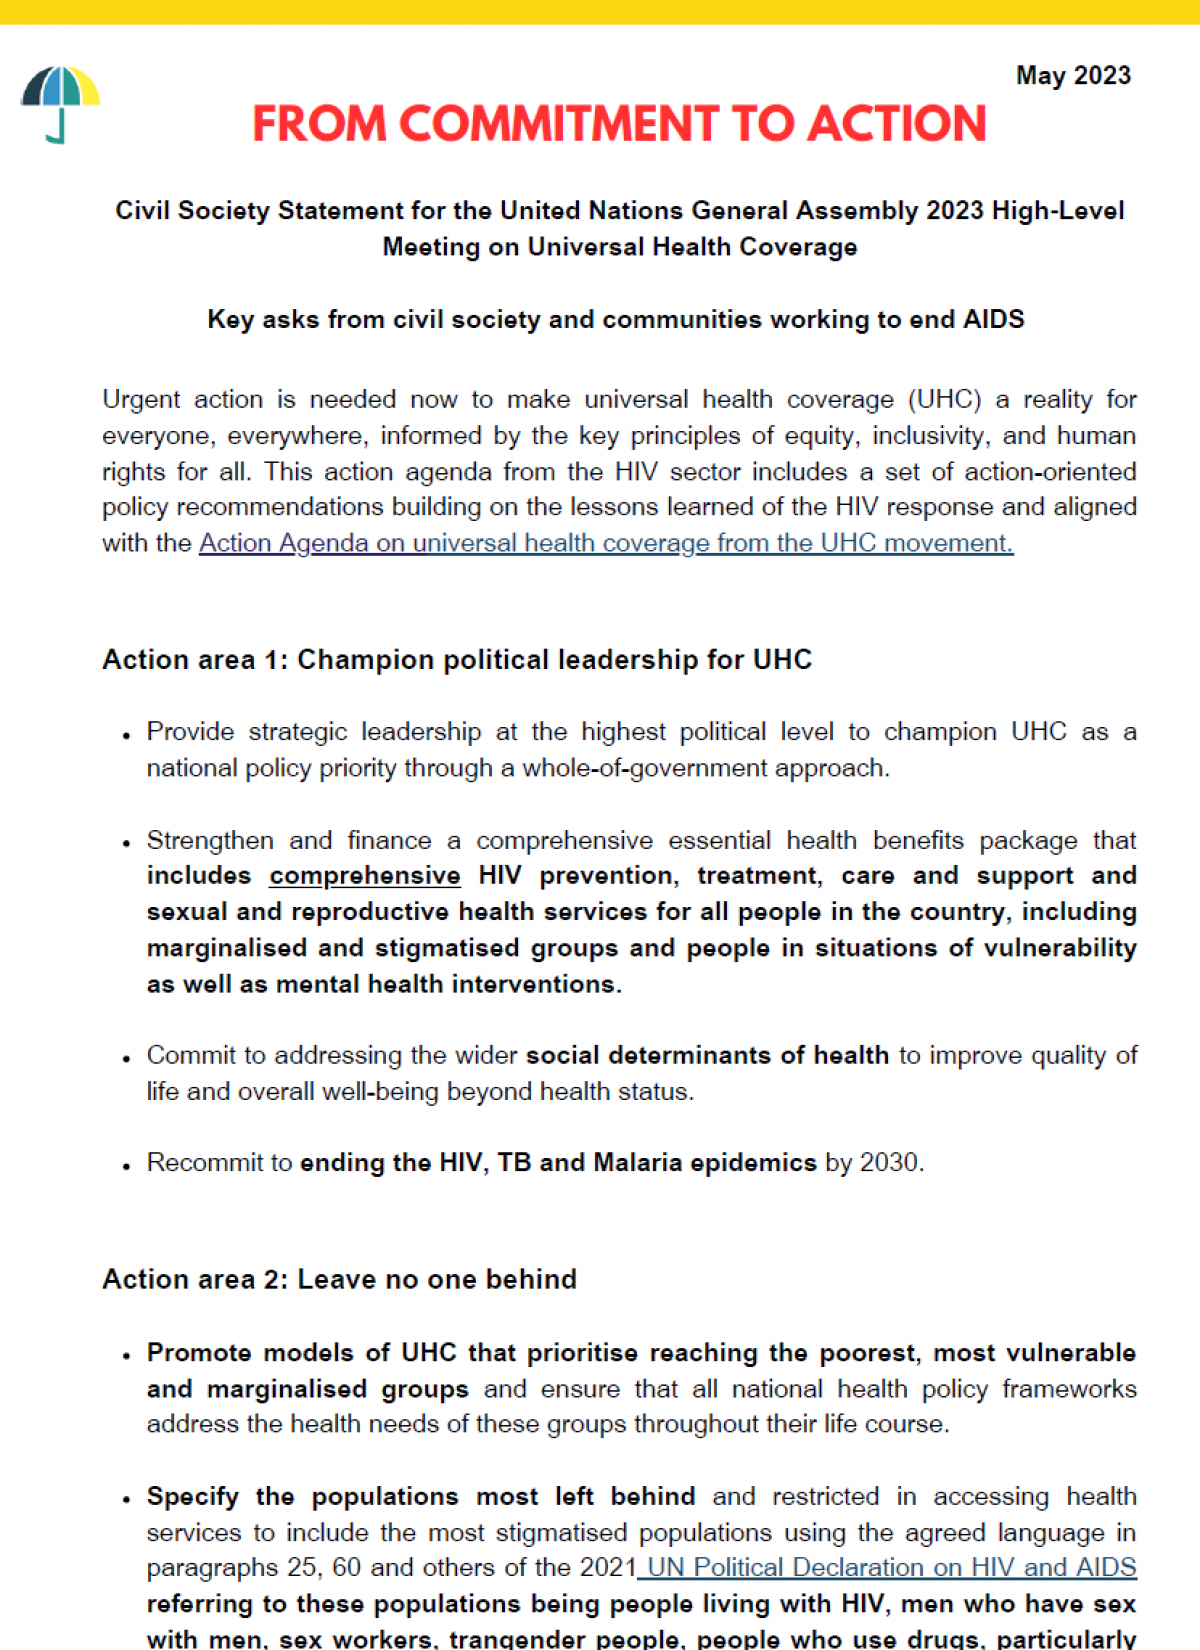 FROM COMMITMENT TO ACTION: Civil Society Statement for the United Nations General Assembly 2023 High-Level Meeting on Universal Health Coverage